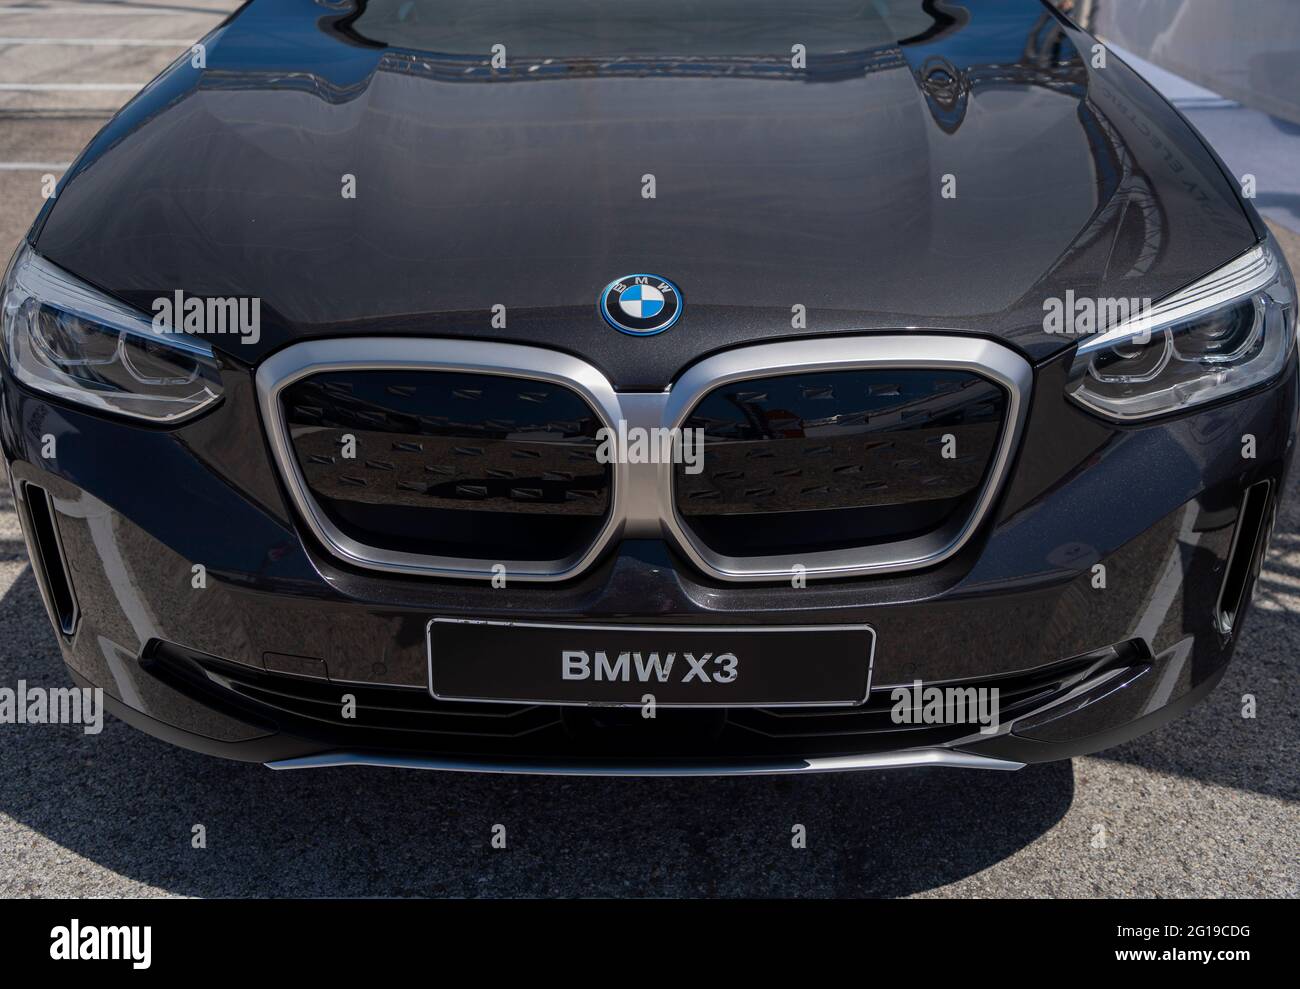 BMW X3 front grill and badge Stock Photo